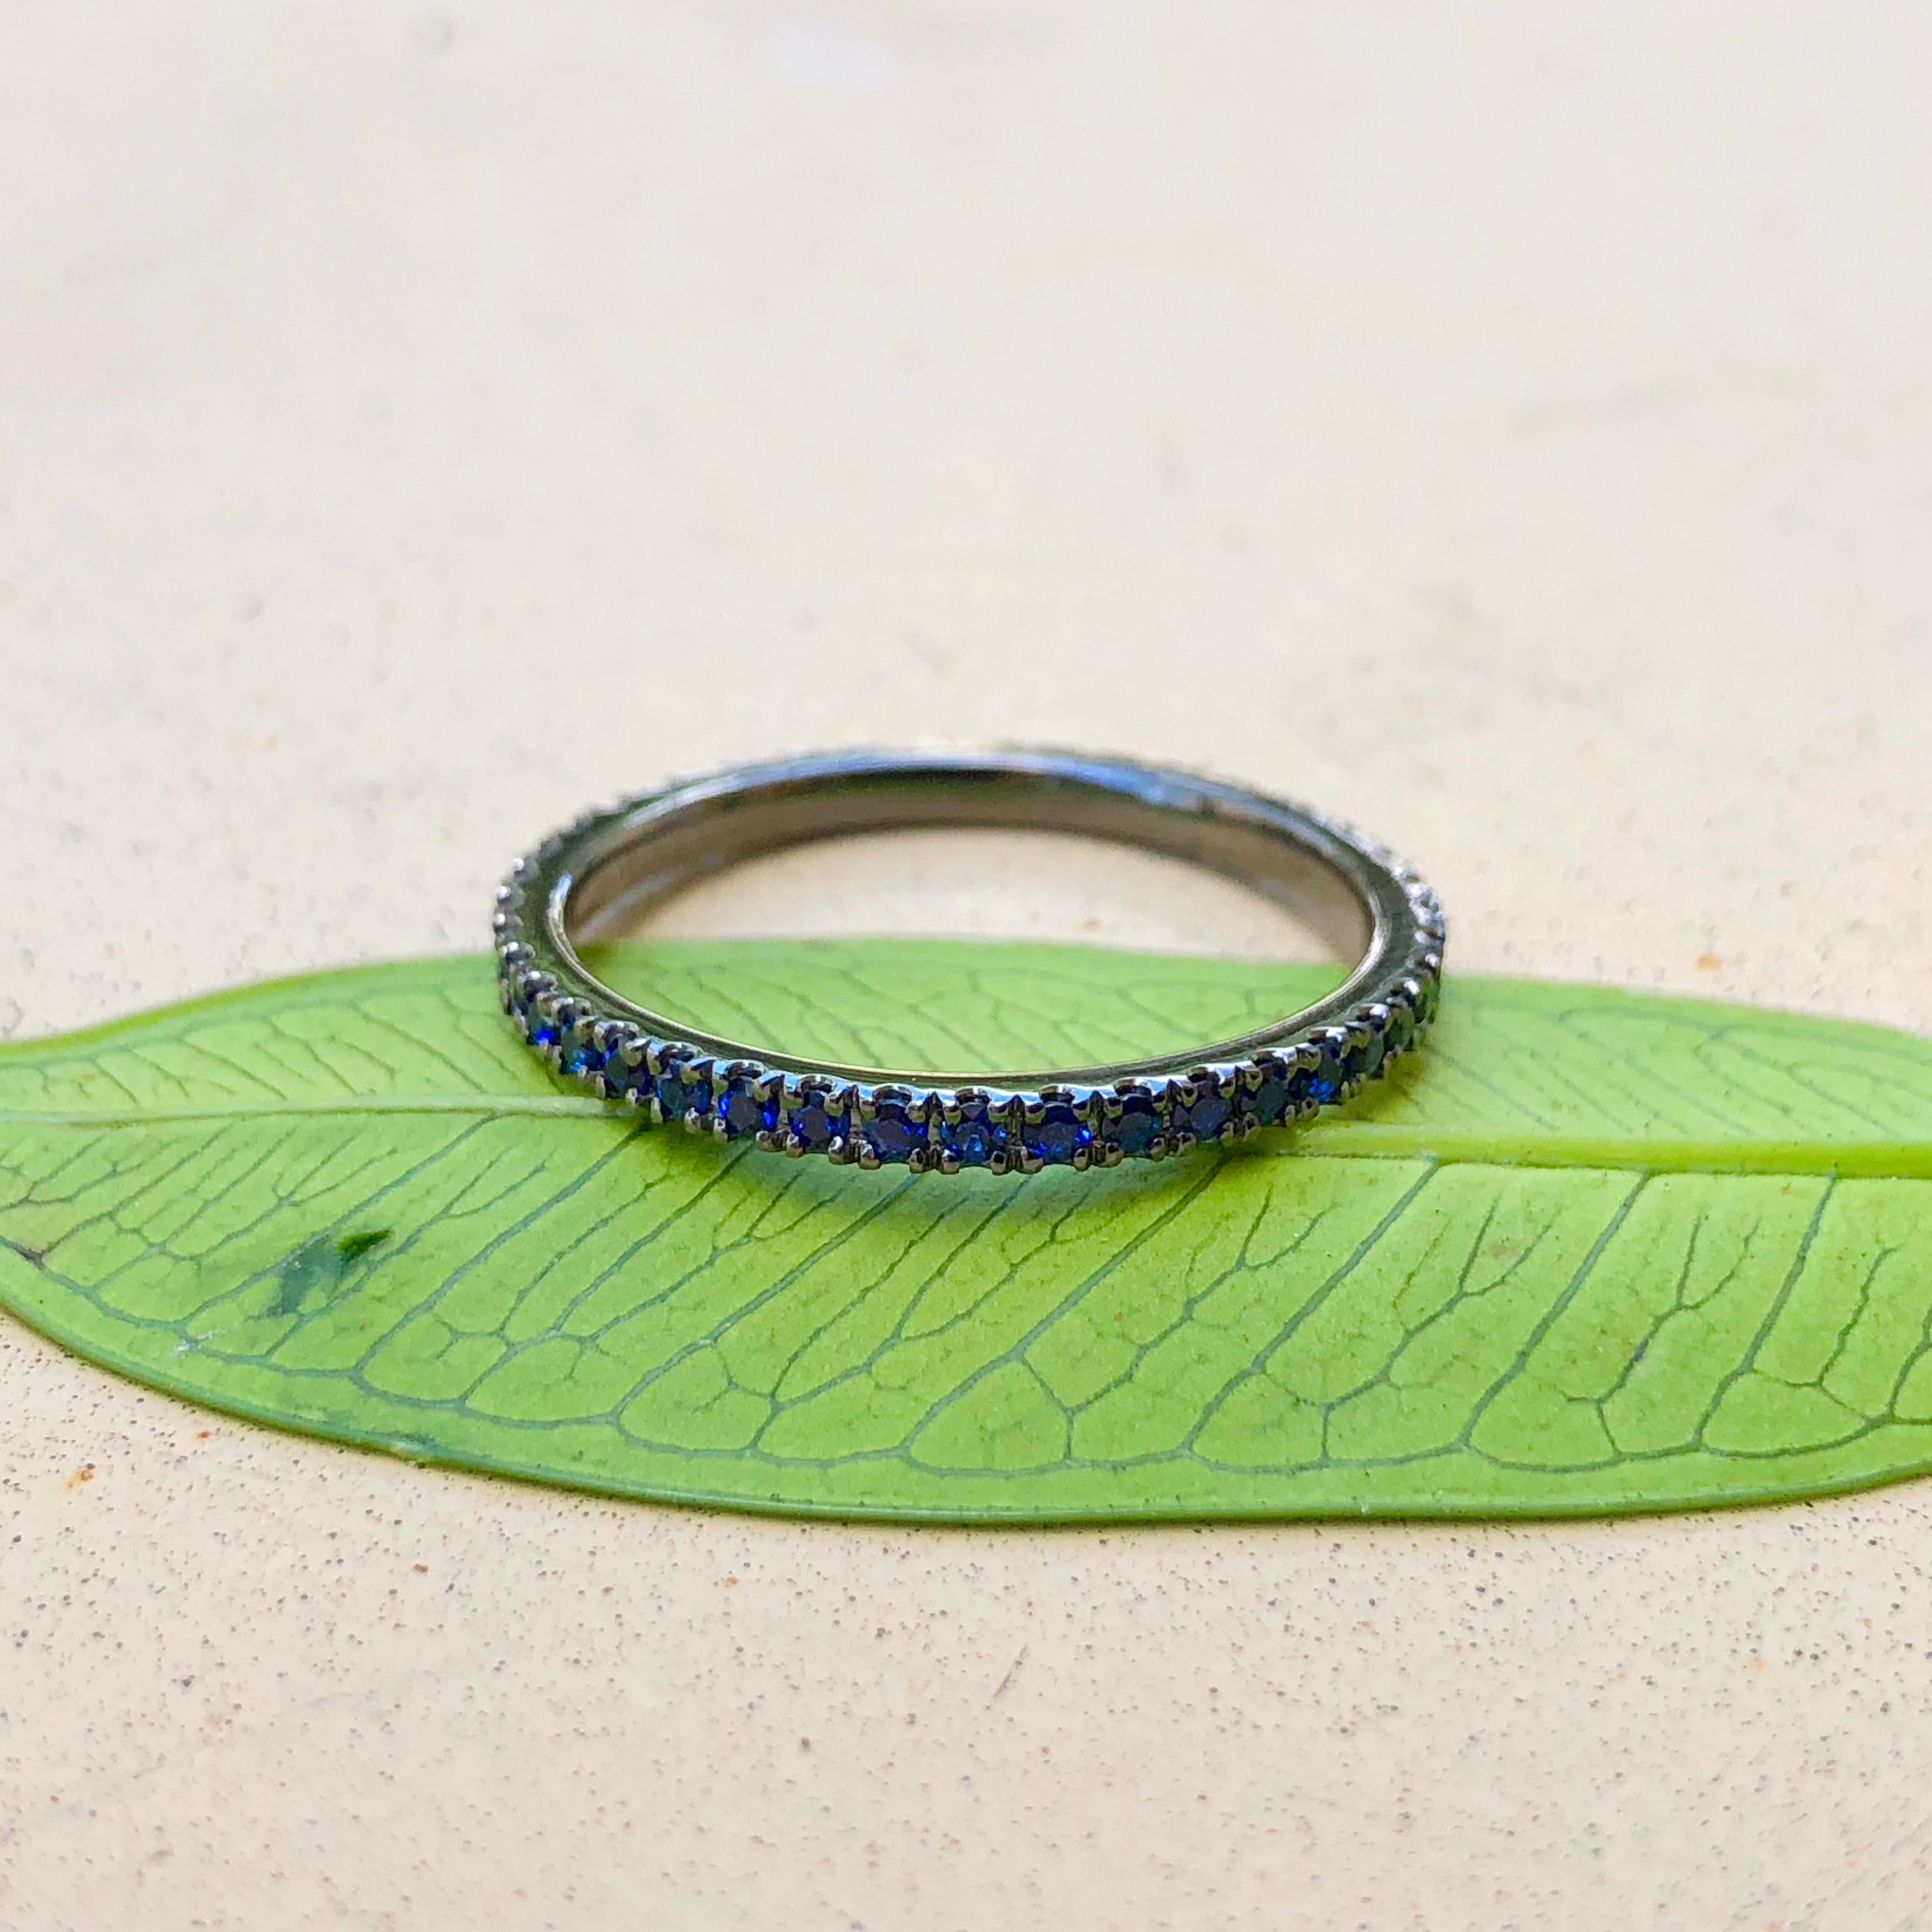 An 18k white gold eternity band with black rhodium plating is set with with thirty-six (36) Round Brilliant Cut Chatham Sapphire that measure 1.3mm a 1.3mm. The ring is a size 6.5 and weighs 1.6 grams (1 pennyweight).

At By Design Jewelers, our